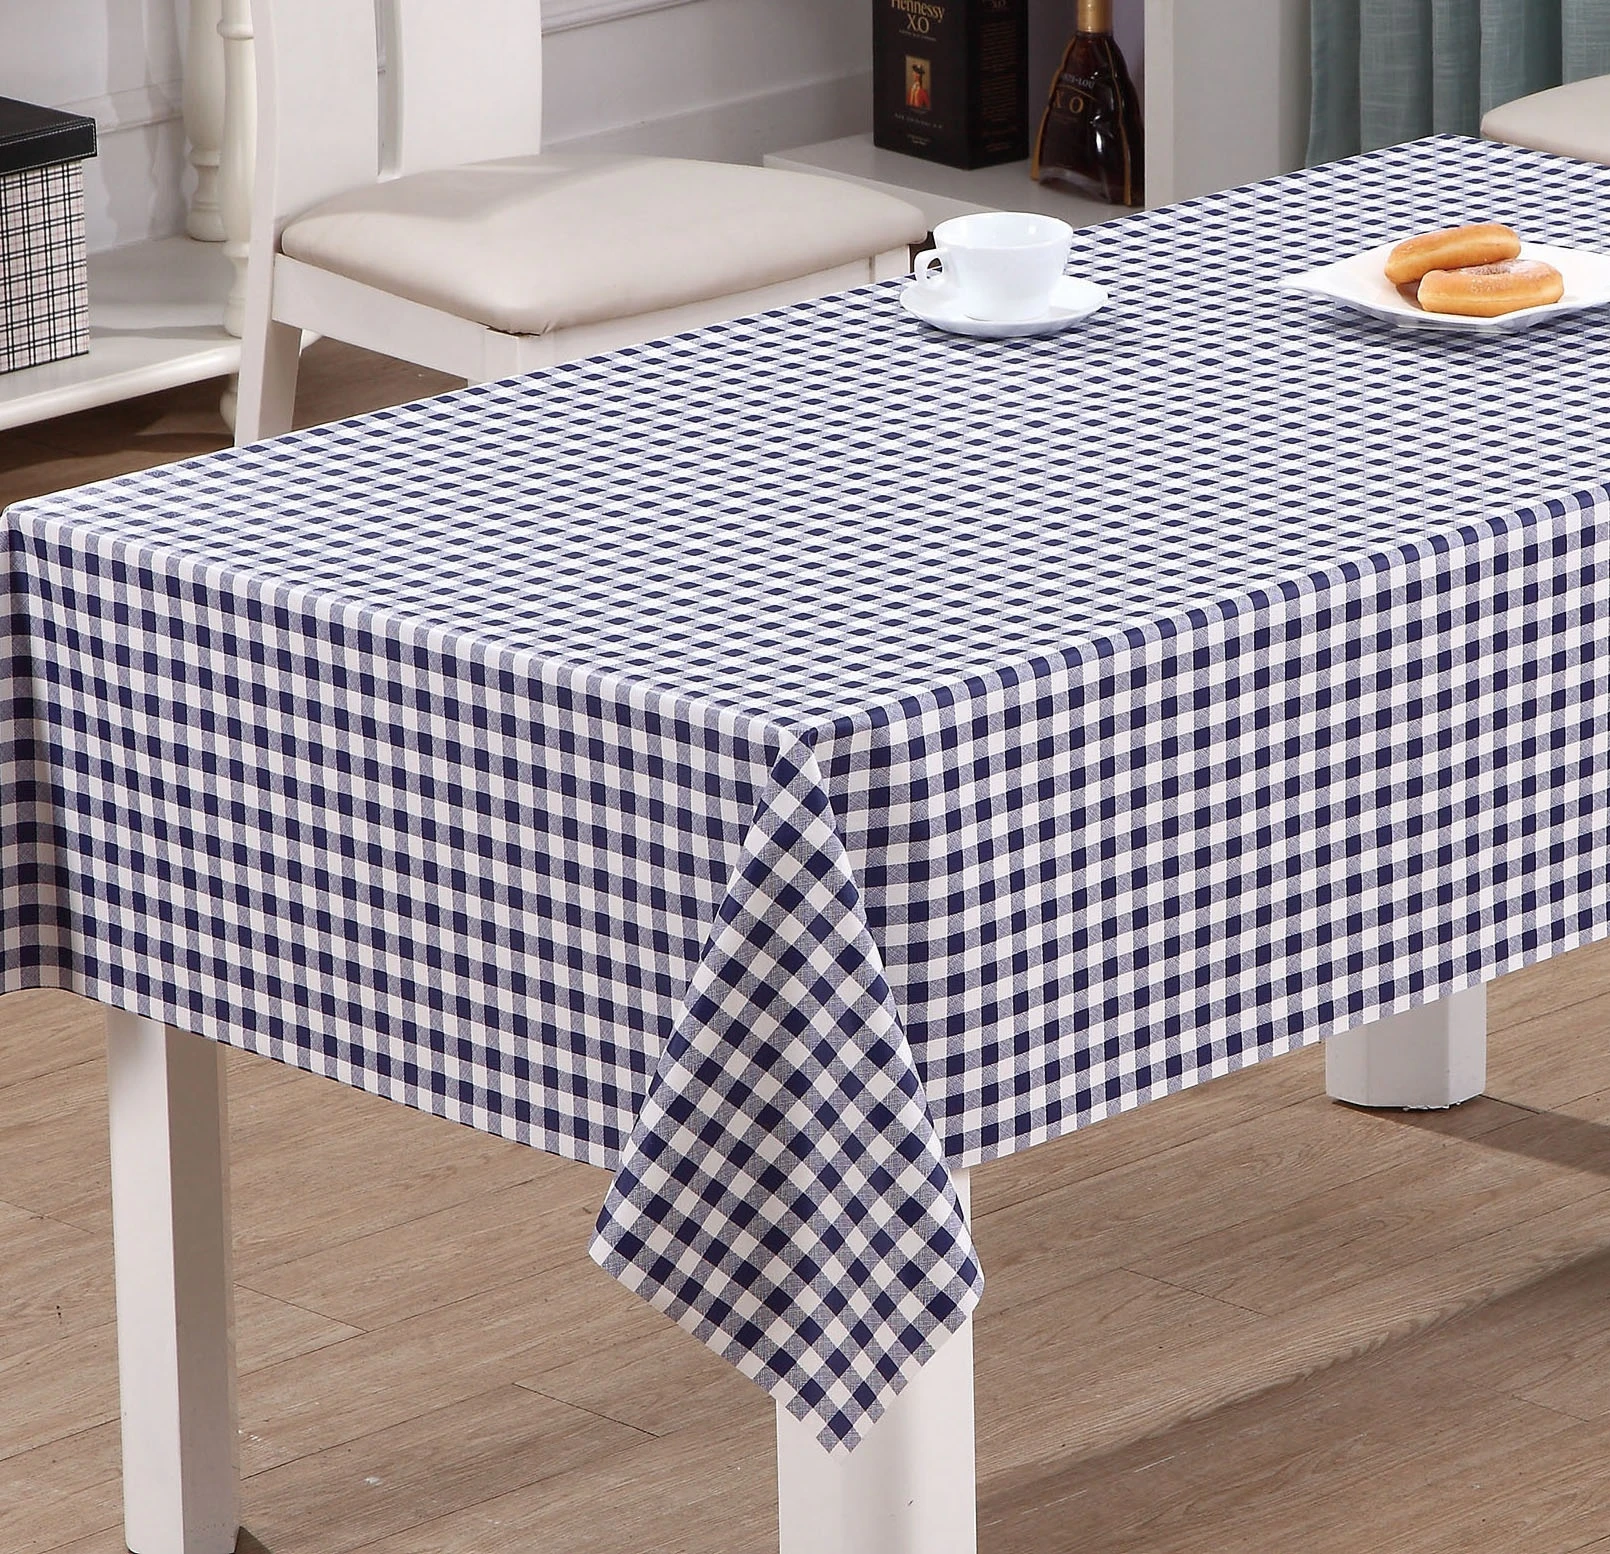 New design colorful environmental-friendly waterproof oilproof pvc printed tablecloth